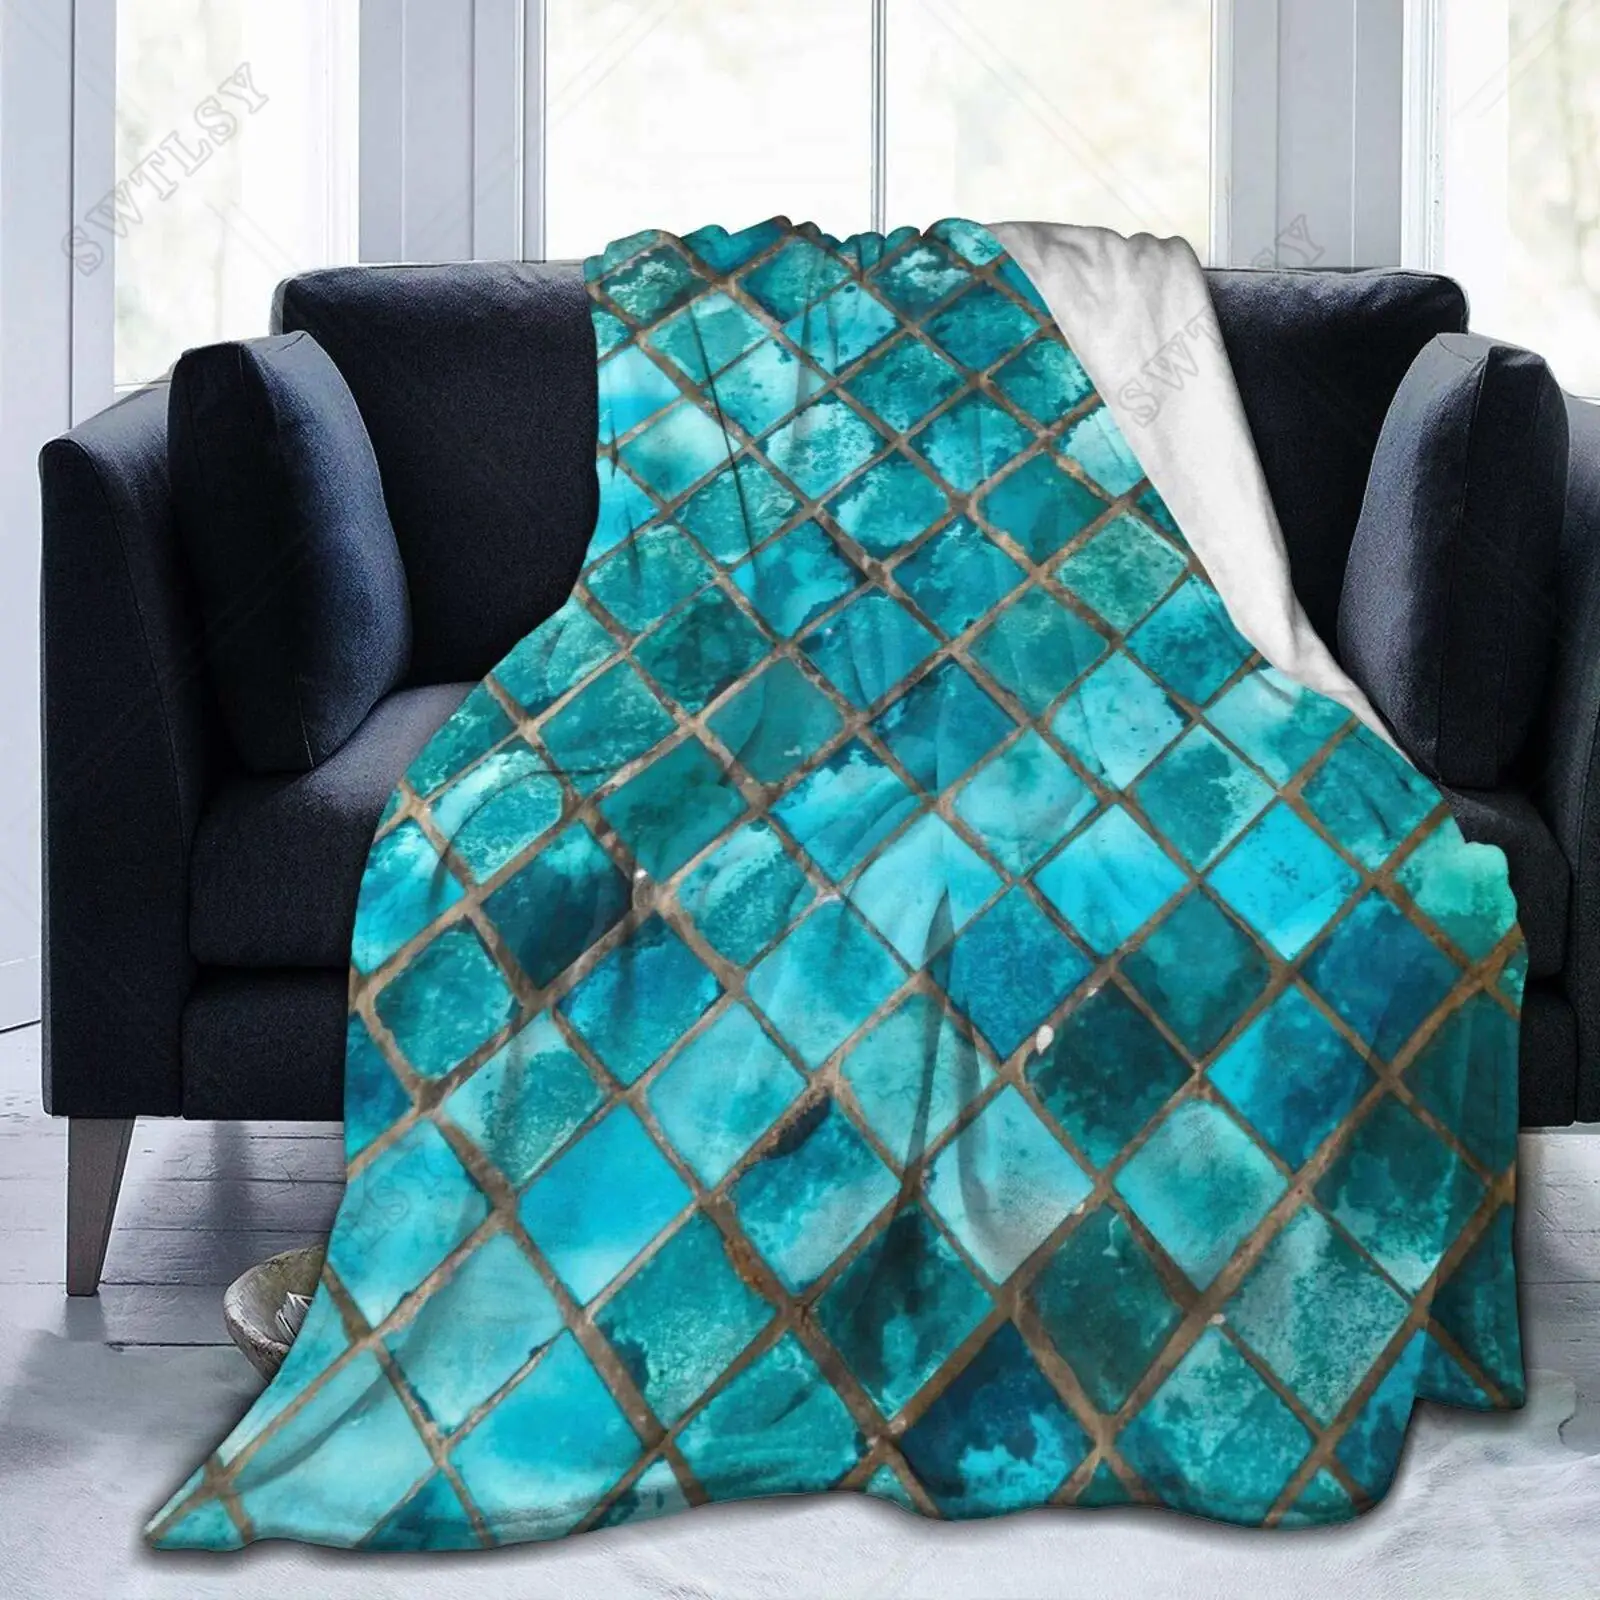 

Turquoise Blue Flannel Fleece Throw Blankets Luxury Turquoise Blanket for Living Room Bedroom Sofa Couch Warm Soft Bed Blankets